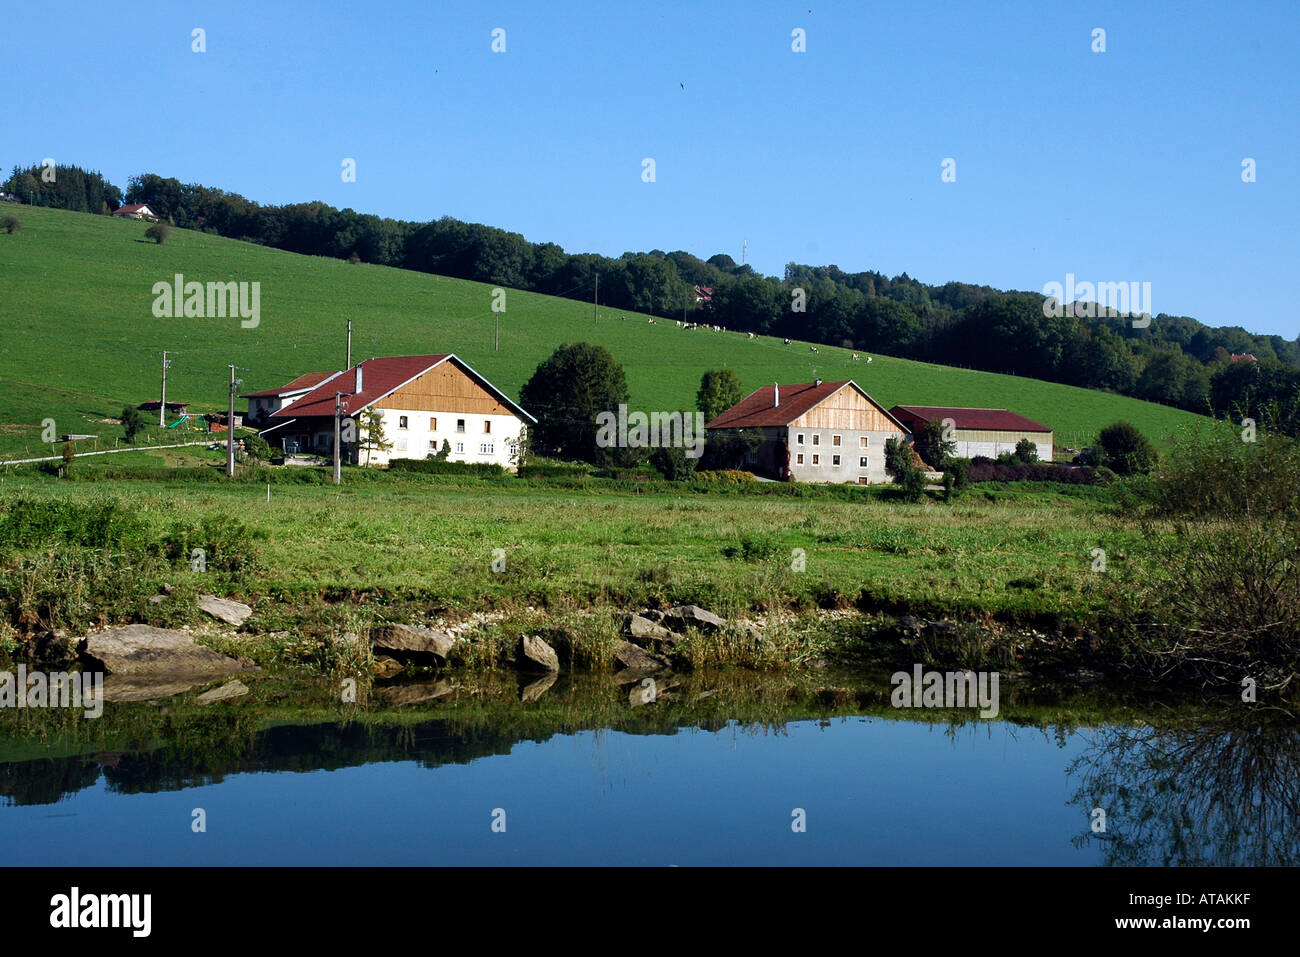 Traditional comtois farmhouses in France's Jura region on the banks of the Doubs river where it faces Switzerland Stock Photo